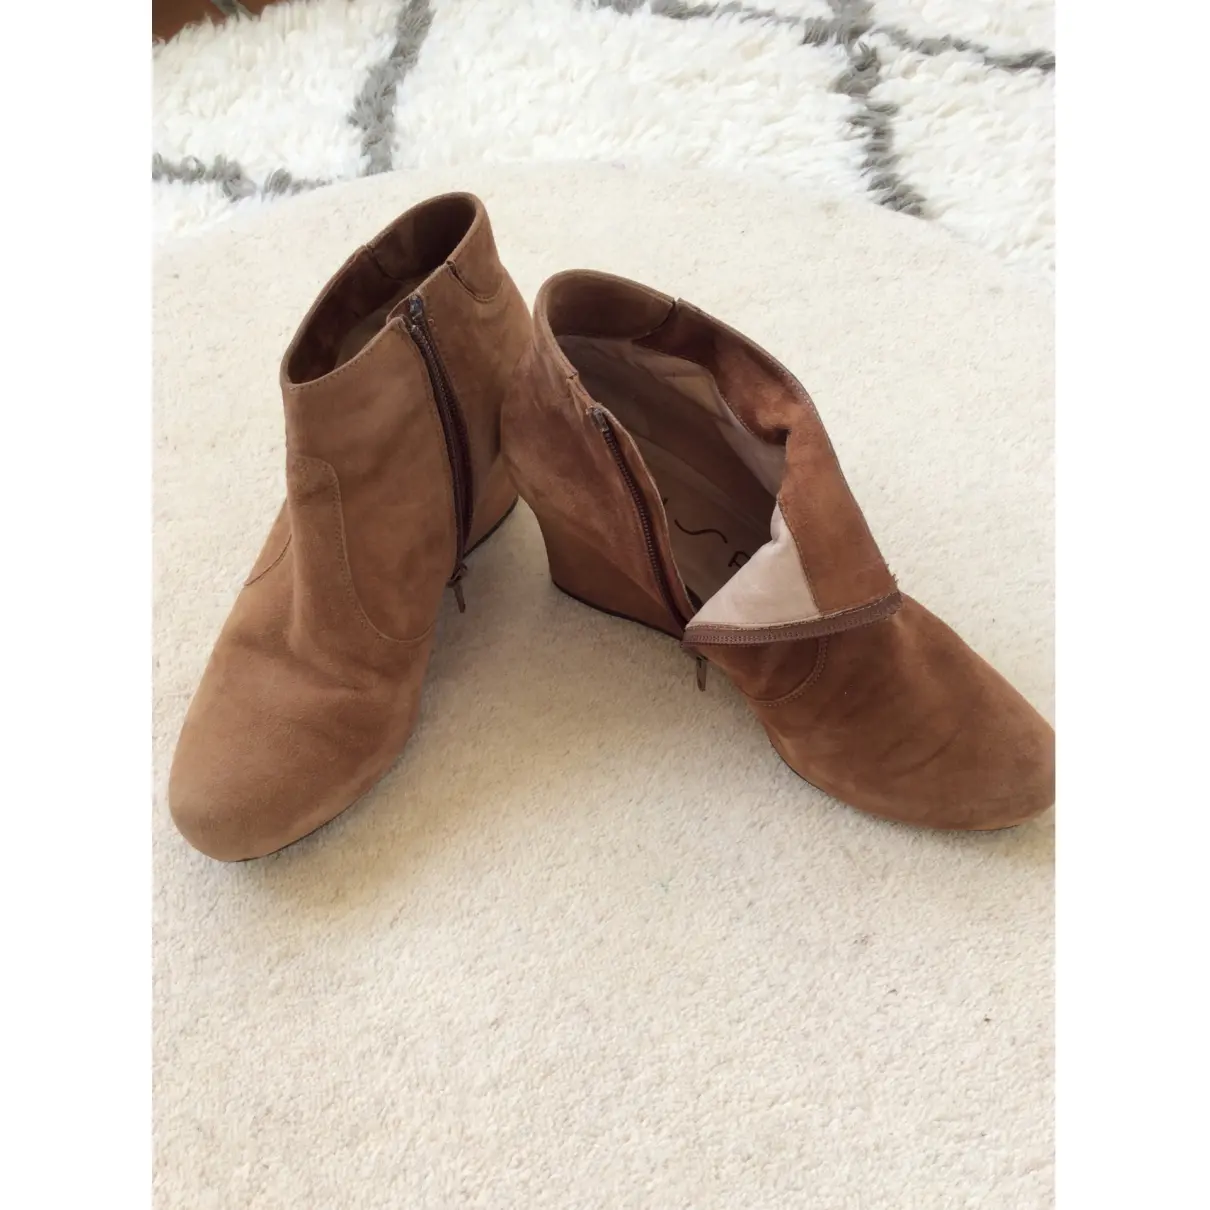 Buy Unisa Ankle boots online